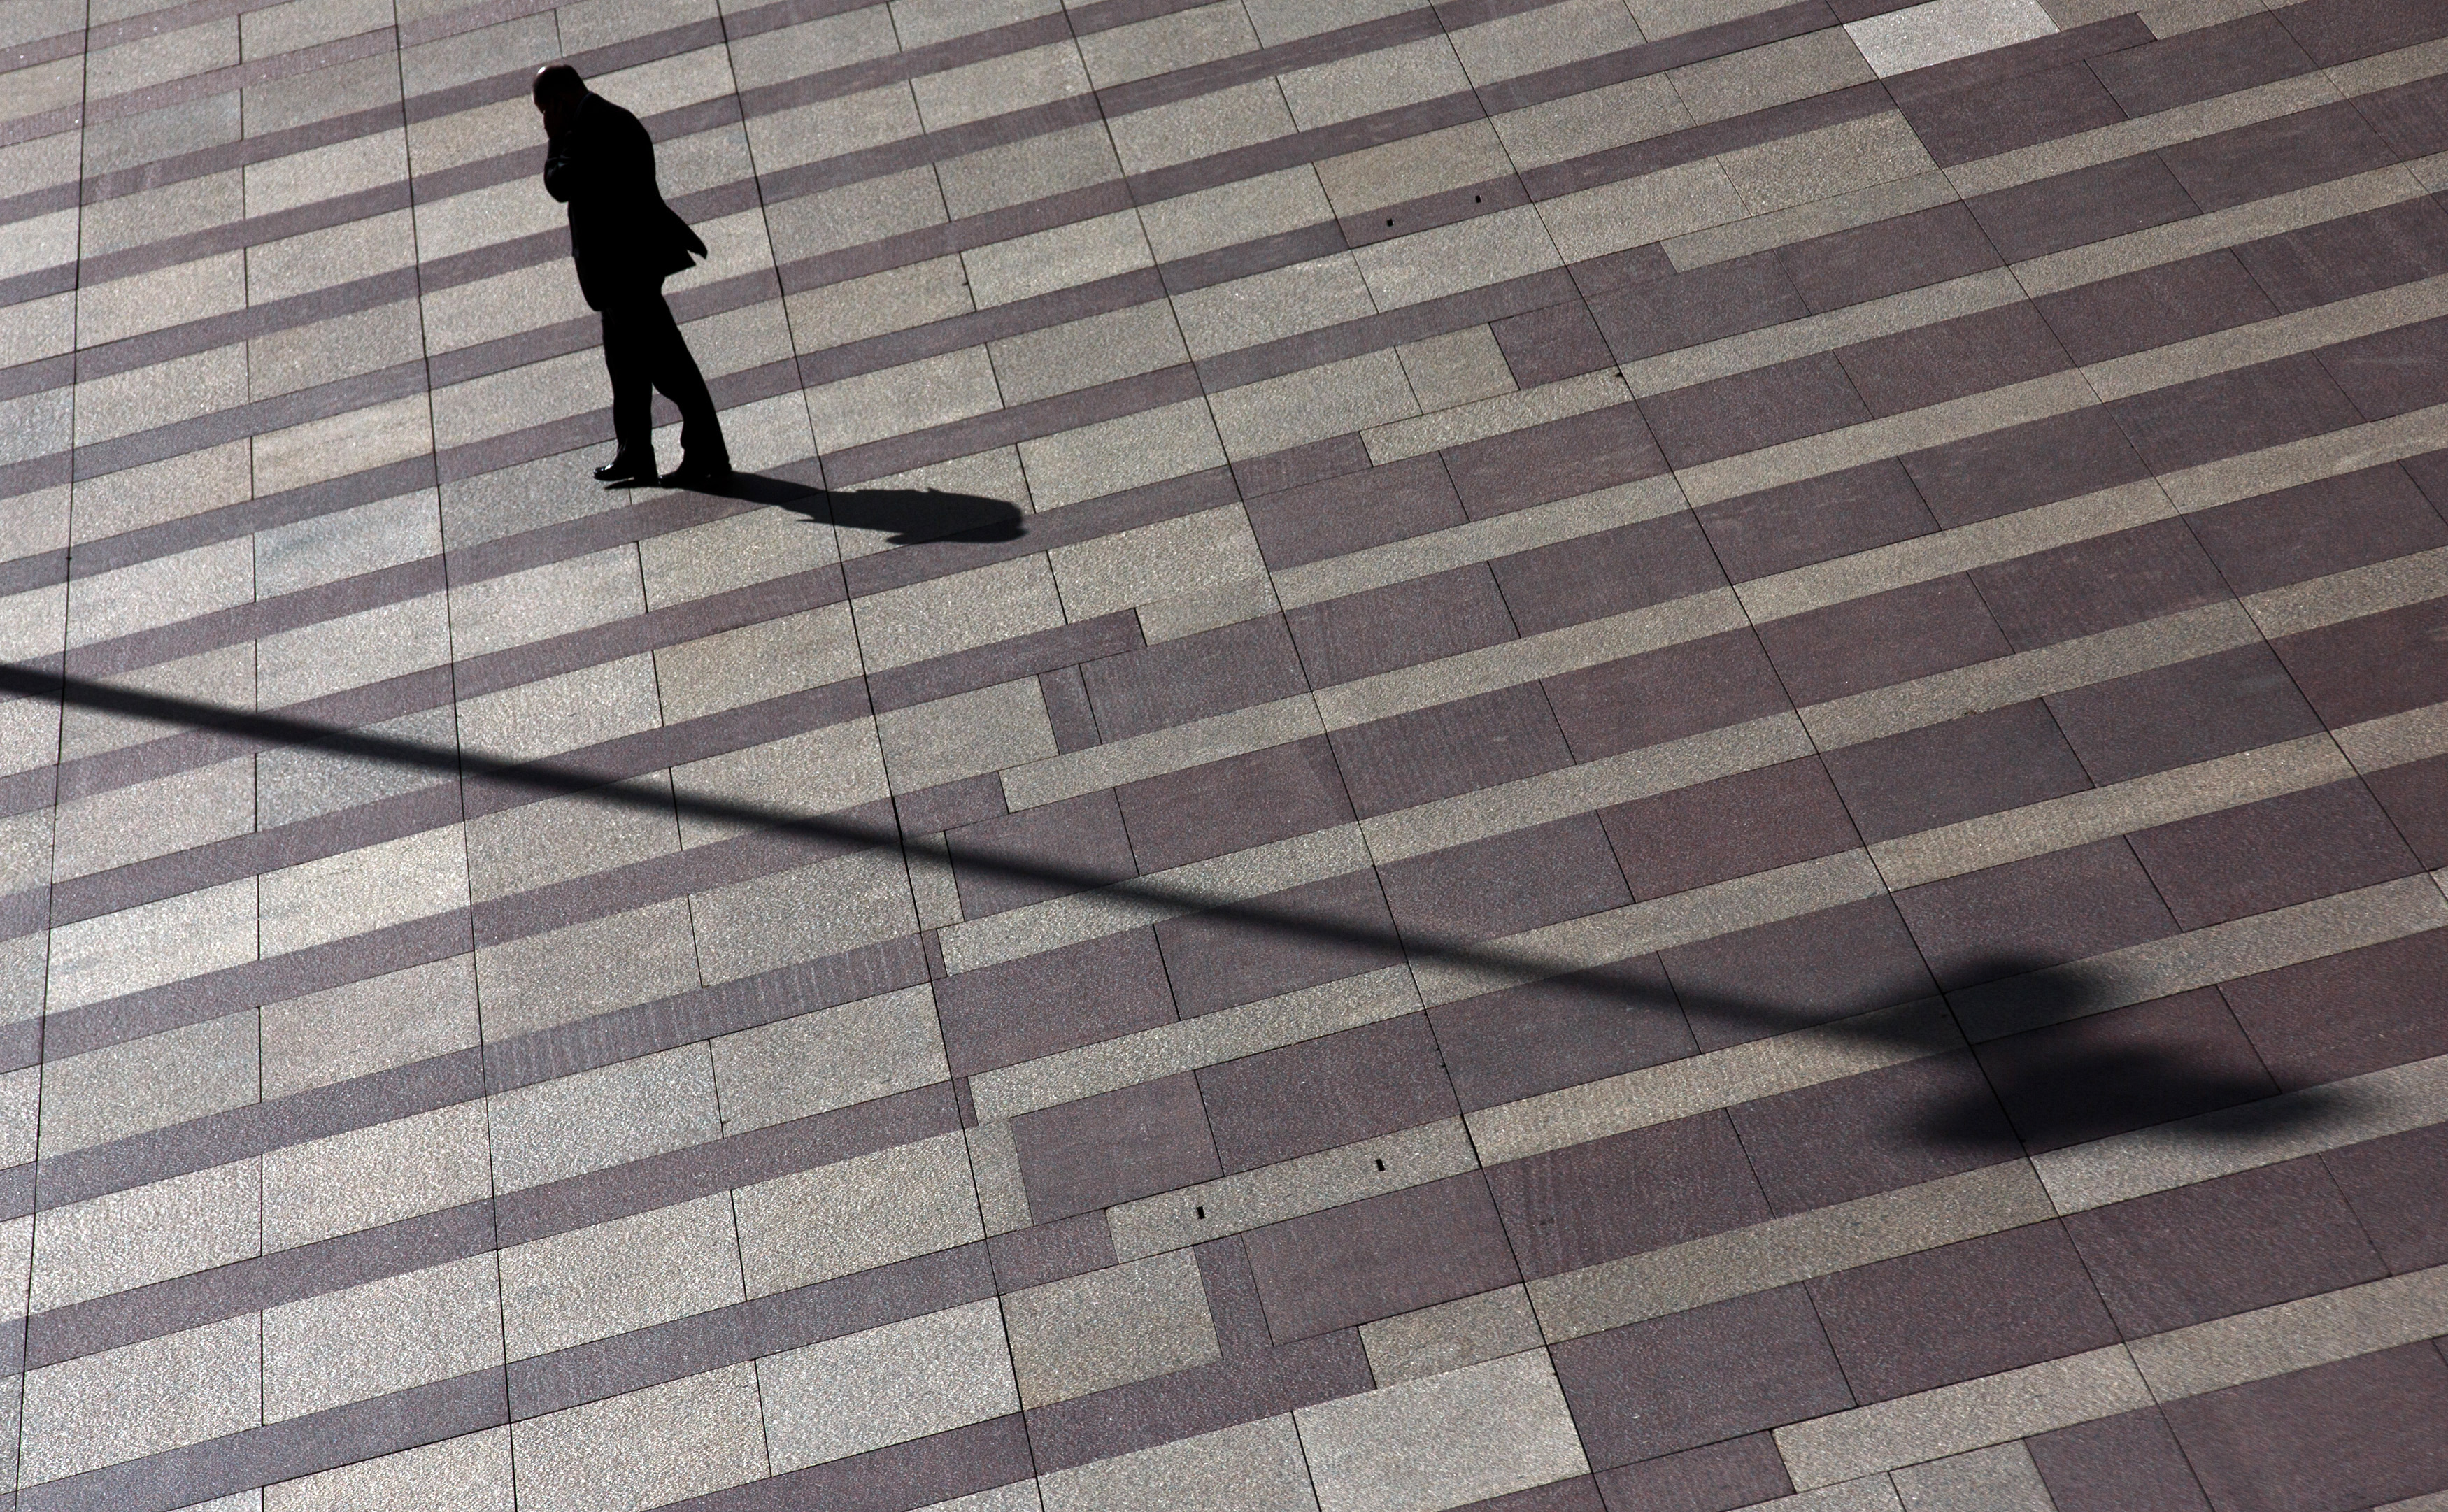 Man talks on mobile phone as he walks on a patterned floor at a yard outside an office building in Madrid's financial district